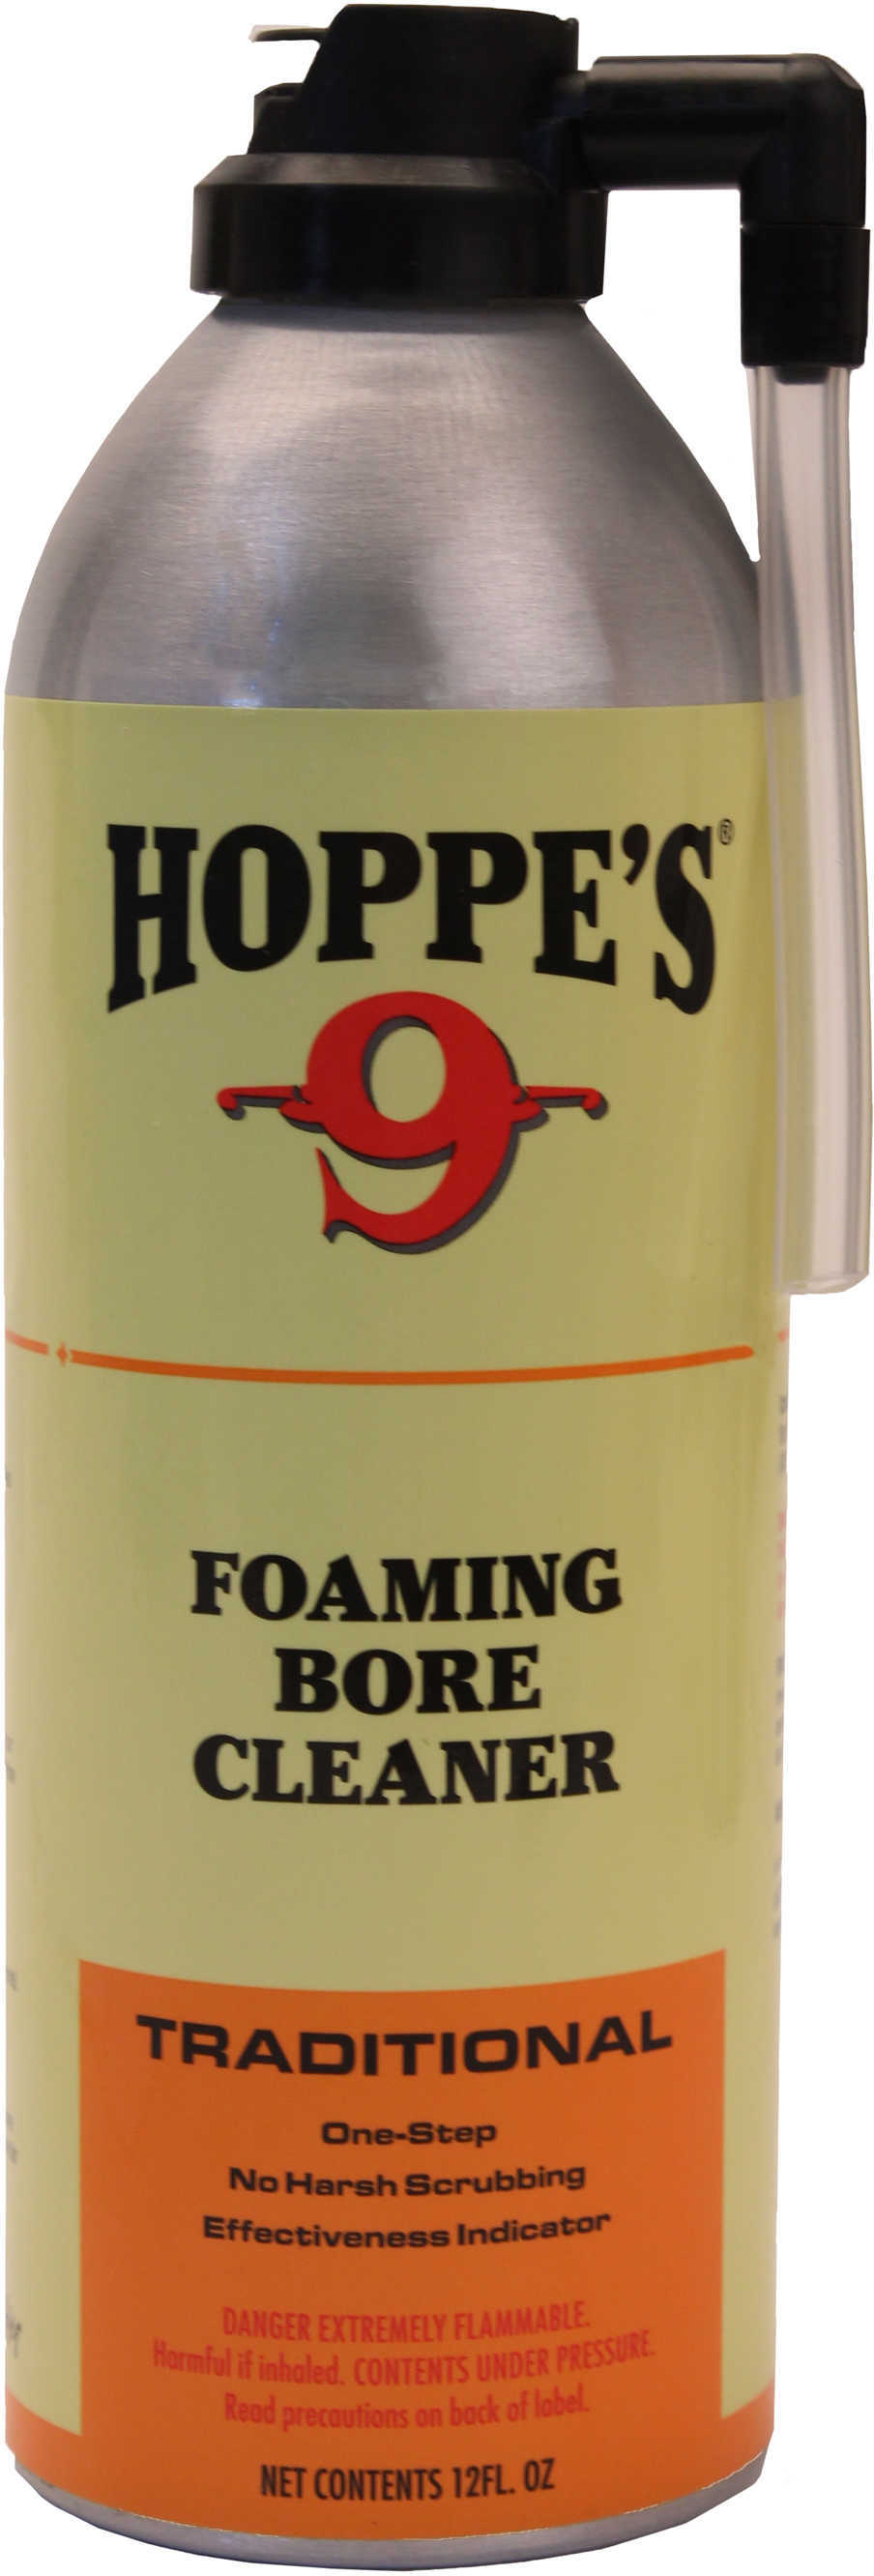 Hoppes 908 Foaming Bore Cleaner 12 oz Md: 908